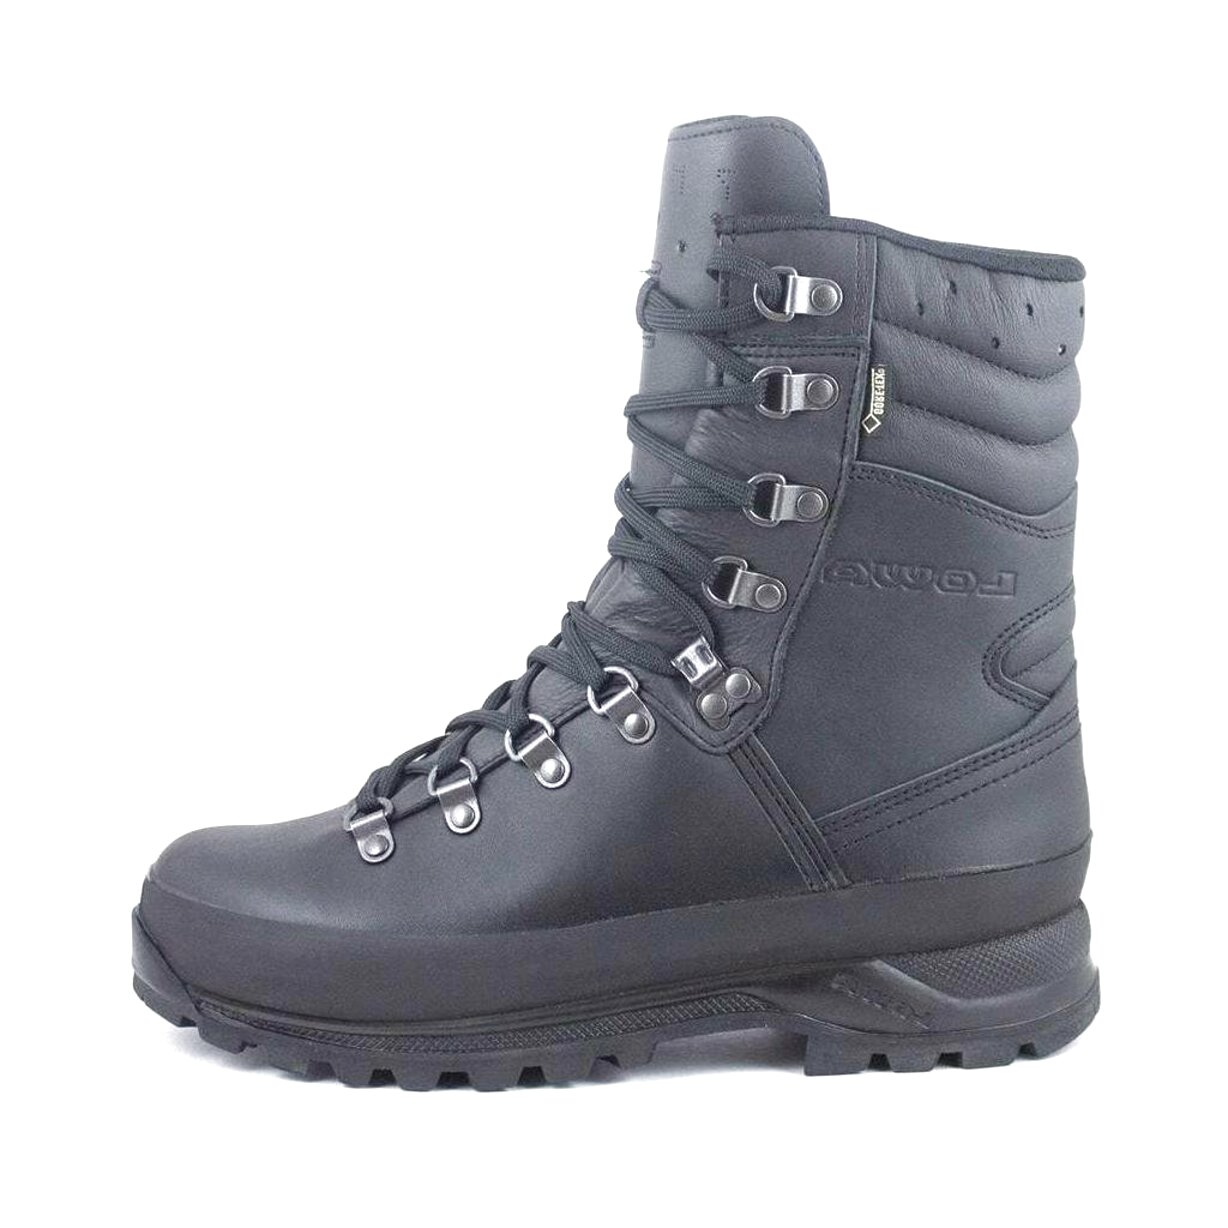 Second hand Lowa Combat Boots in Ireland | 54 used Lowa Combat Boots